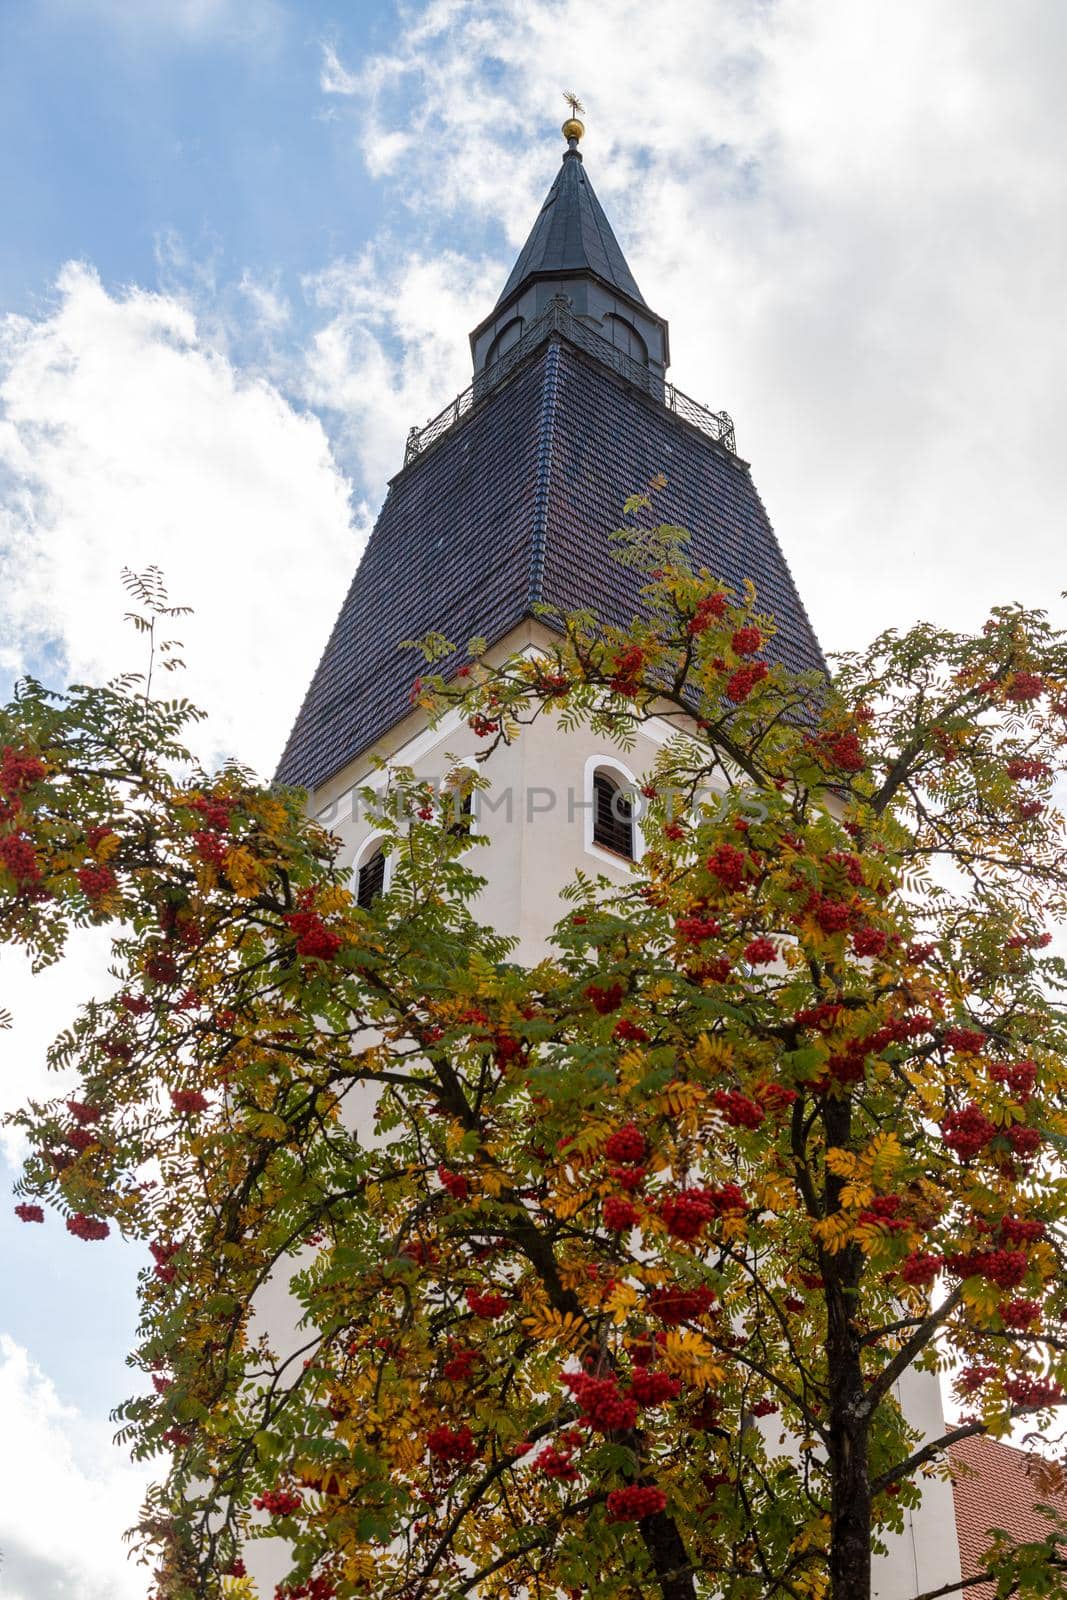 Tower of the parish church of St. Lorenz in Berching, Bavaria in autumn with multicolored tree in foreground by reinerc